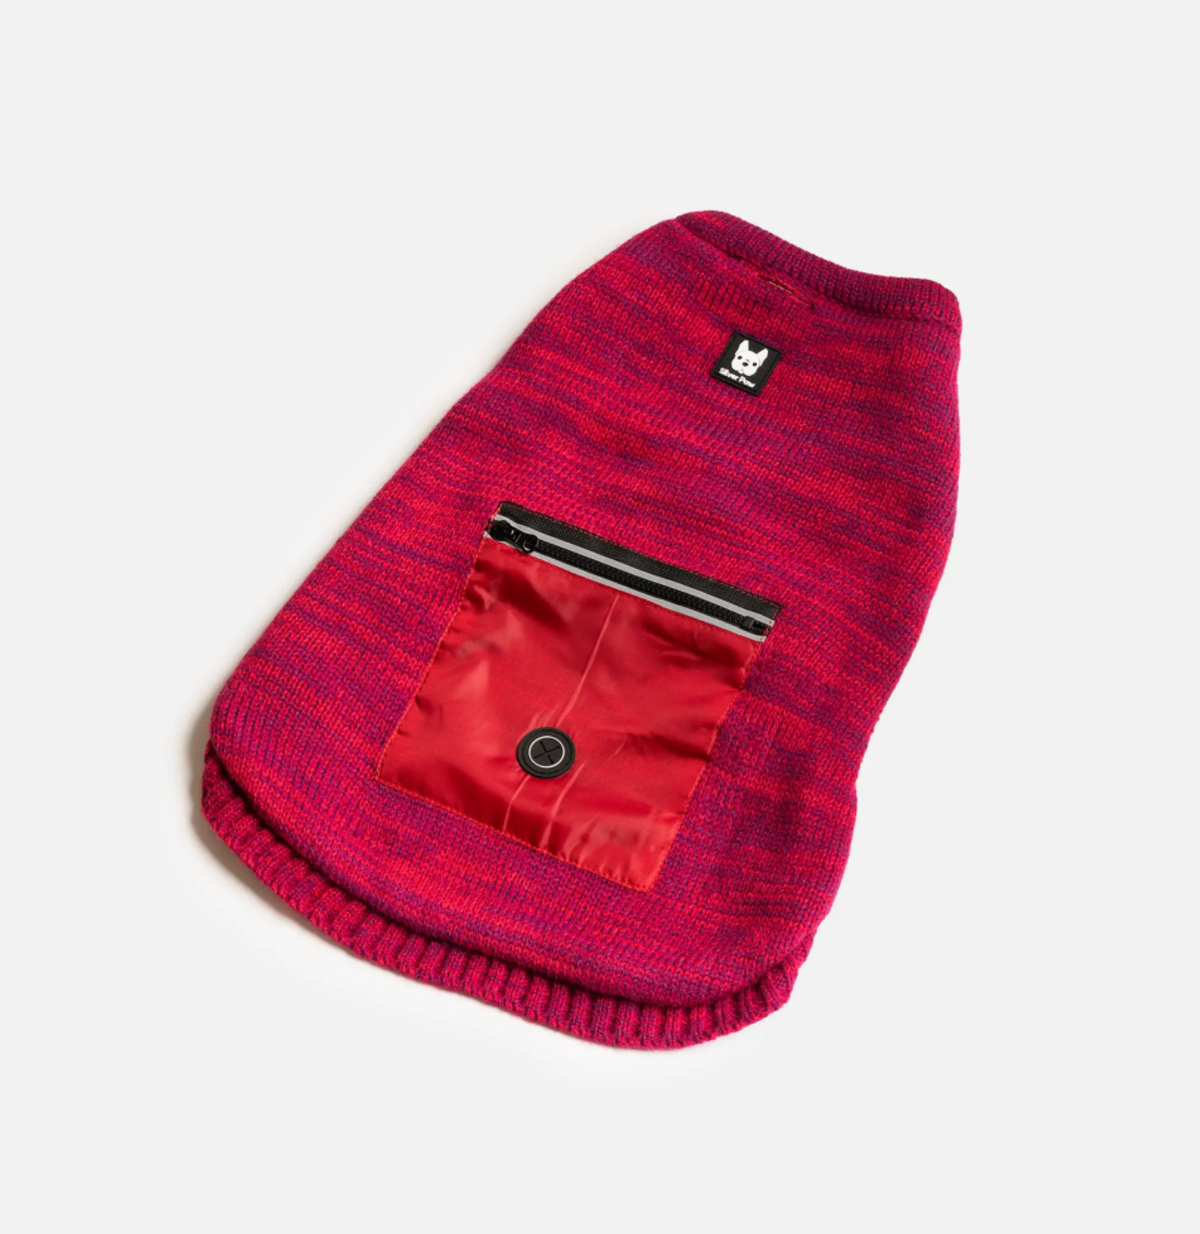 Mia Sweater - Red - 3 Red Rovers